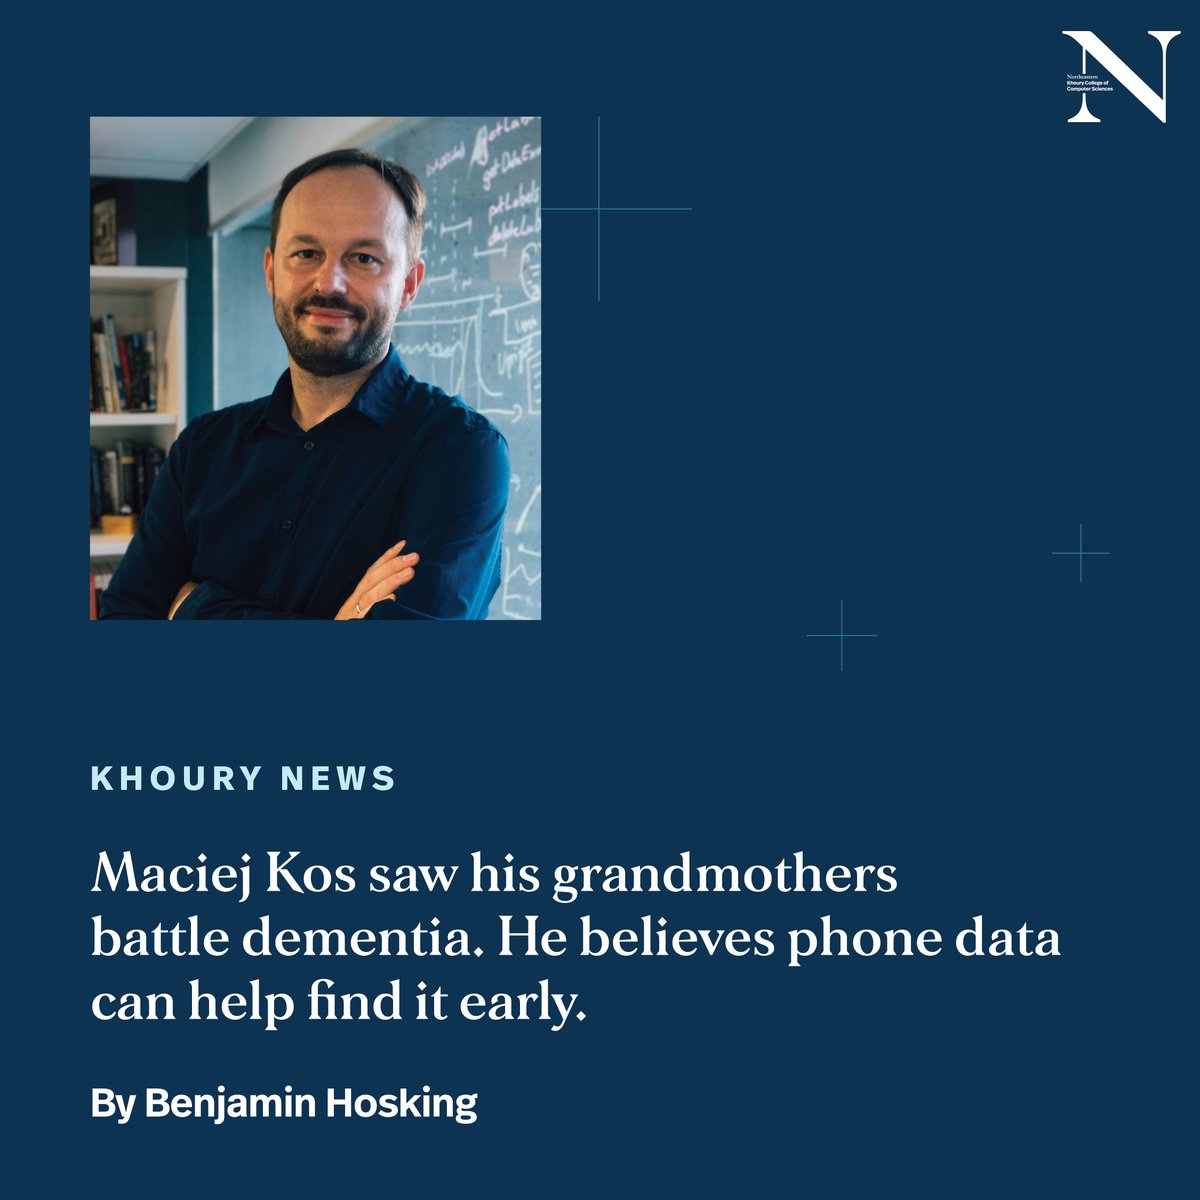 By parsing the data we generate as we use our smartphones, Khoury researcher Maciej Kos says he can pinpoint subtle changes in cognitive function — with huge implications for detecting dementia. Read more! bit.ly/3vCvc14 @mmaciek @NIHAging @NUnetsi